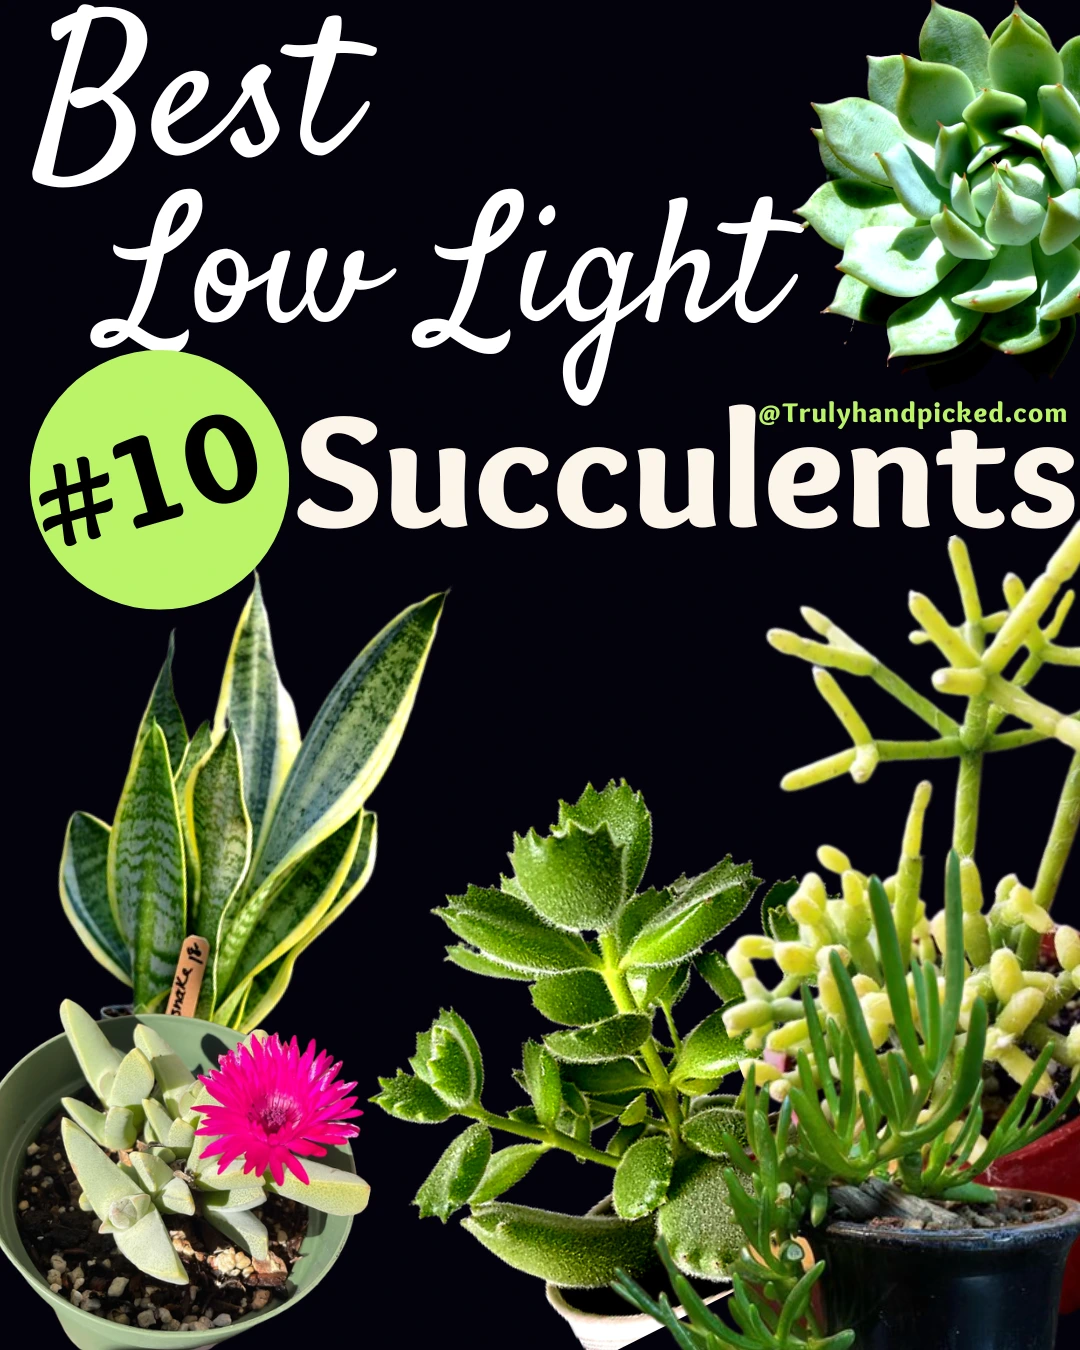 10 Best Low Light Succulents for Indoors and Shade Area Cactus